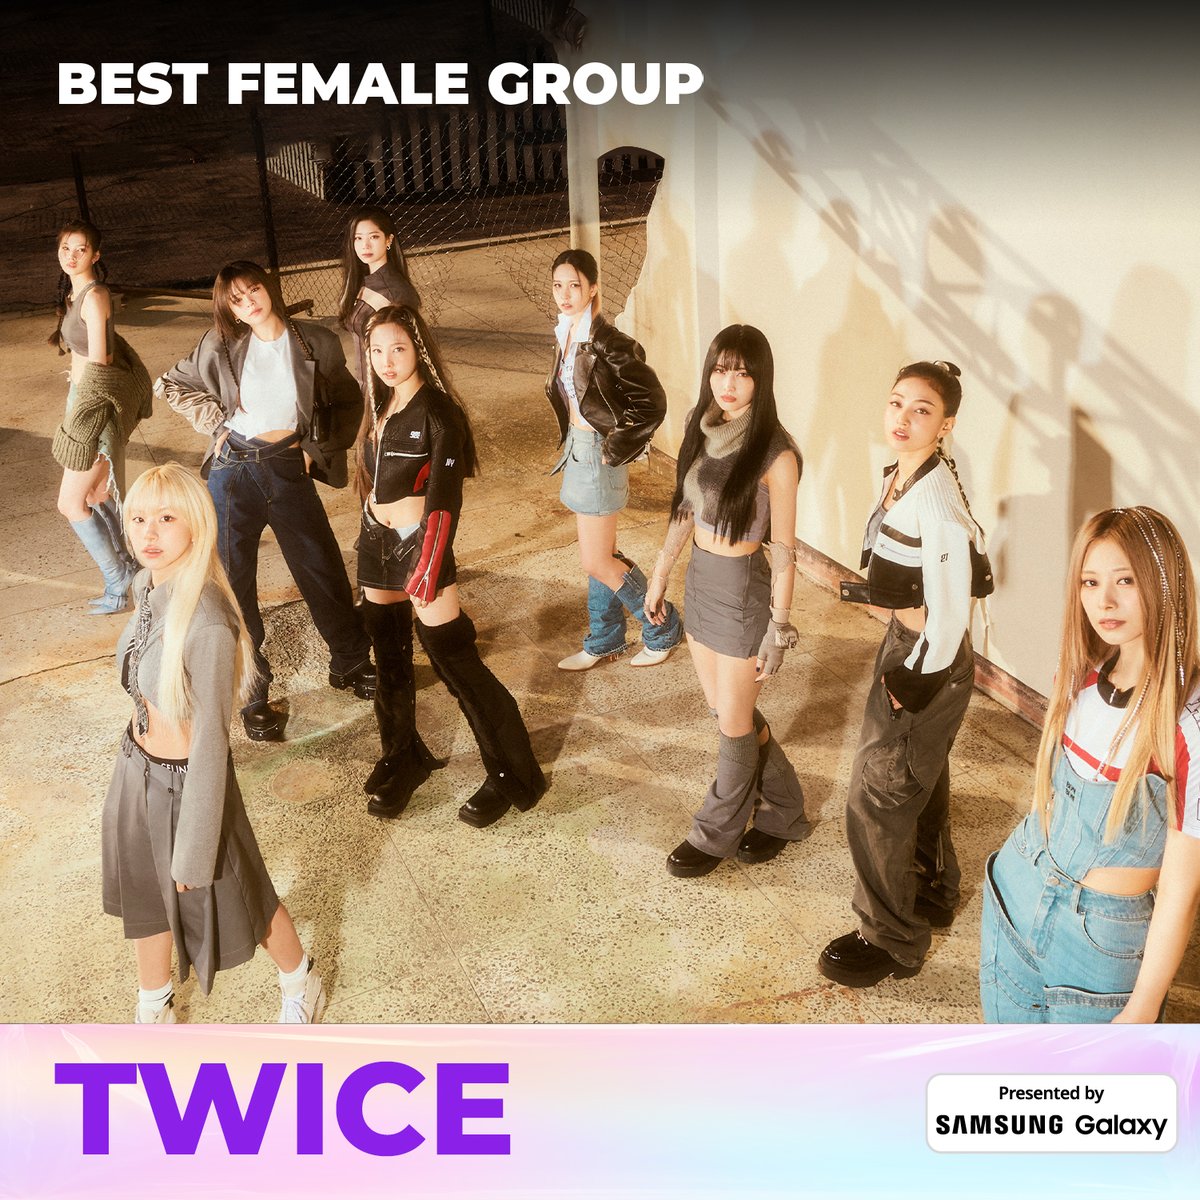 [#2023MAMA] Best Female Group Nominees I 여자 그룹상 후보 #twice ONE I BORN 2023 MAMA AWARDS 2023.11.28(TUE)-29(WED) 6PM(KST) #MAMAAWARDS #2023MAMAAWARDS